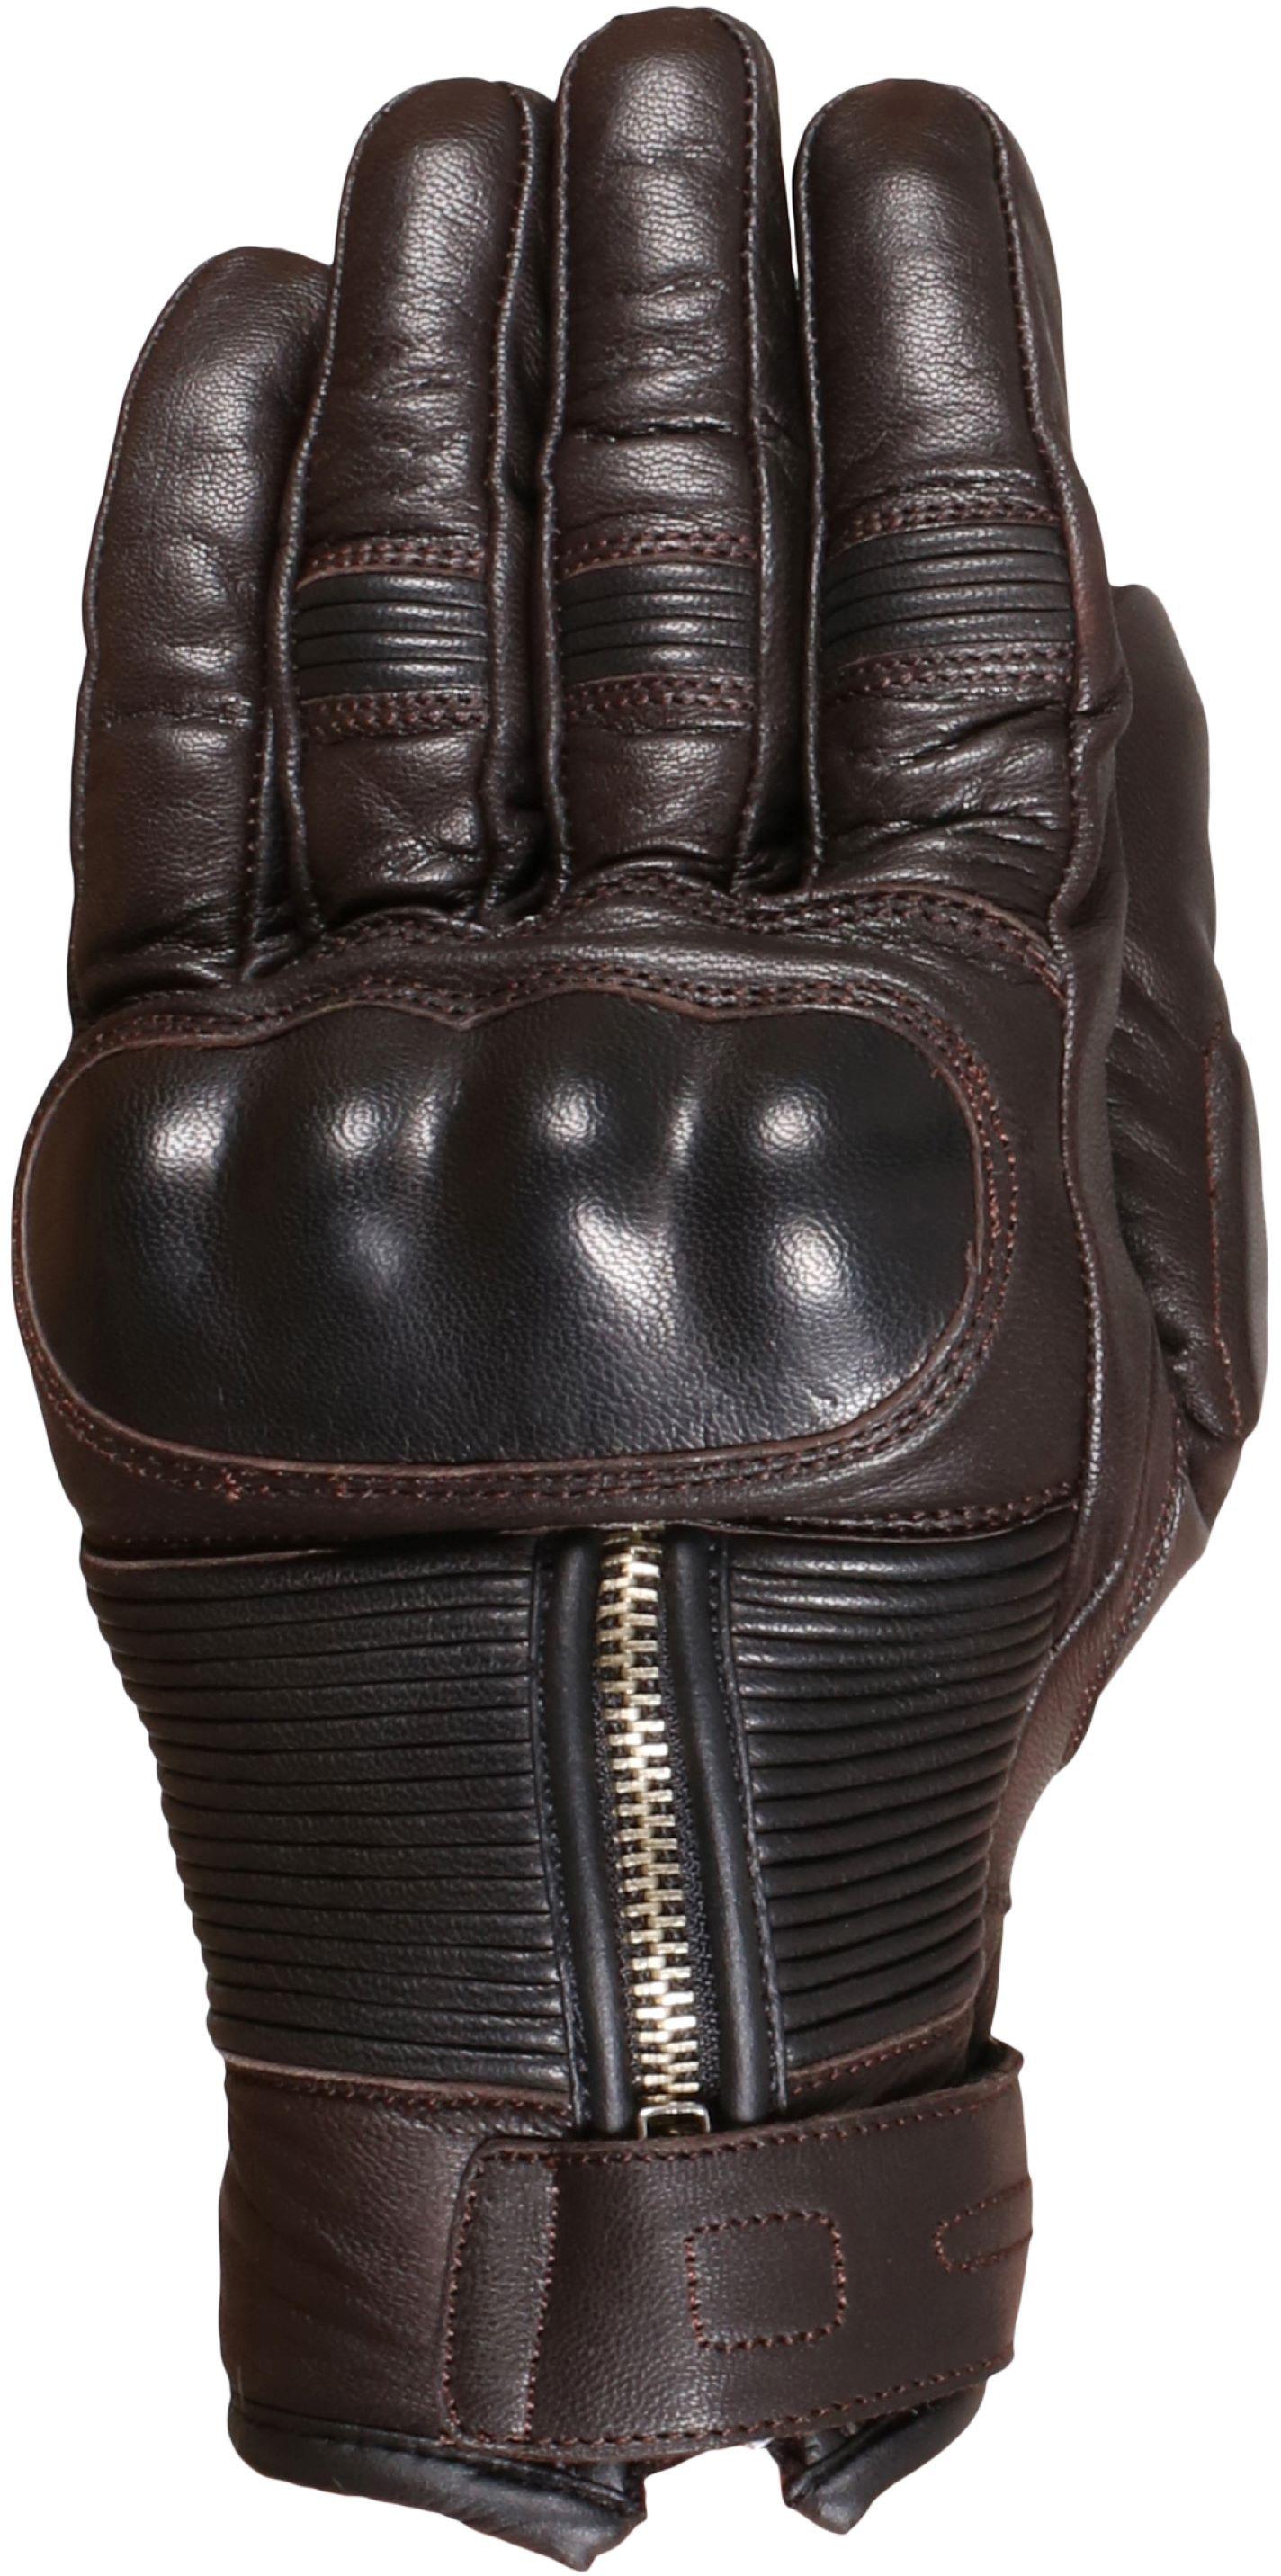 Weise Union Motorcycle Gloves - Brown, 3Xl